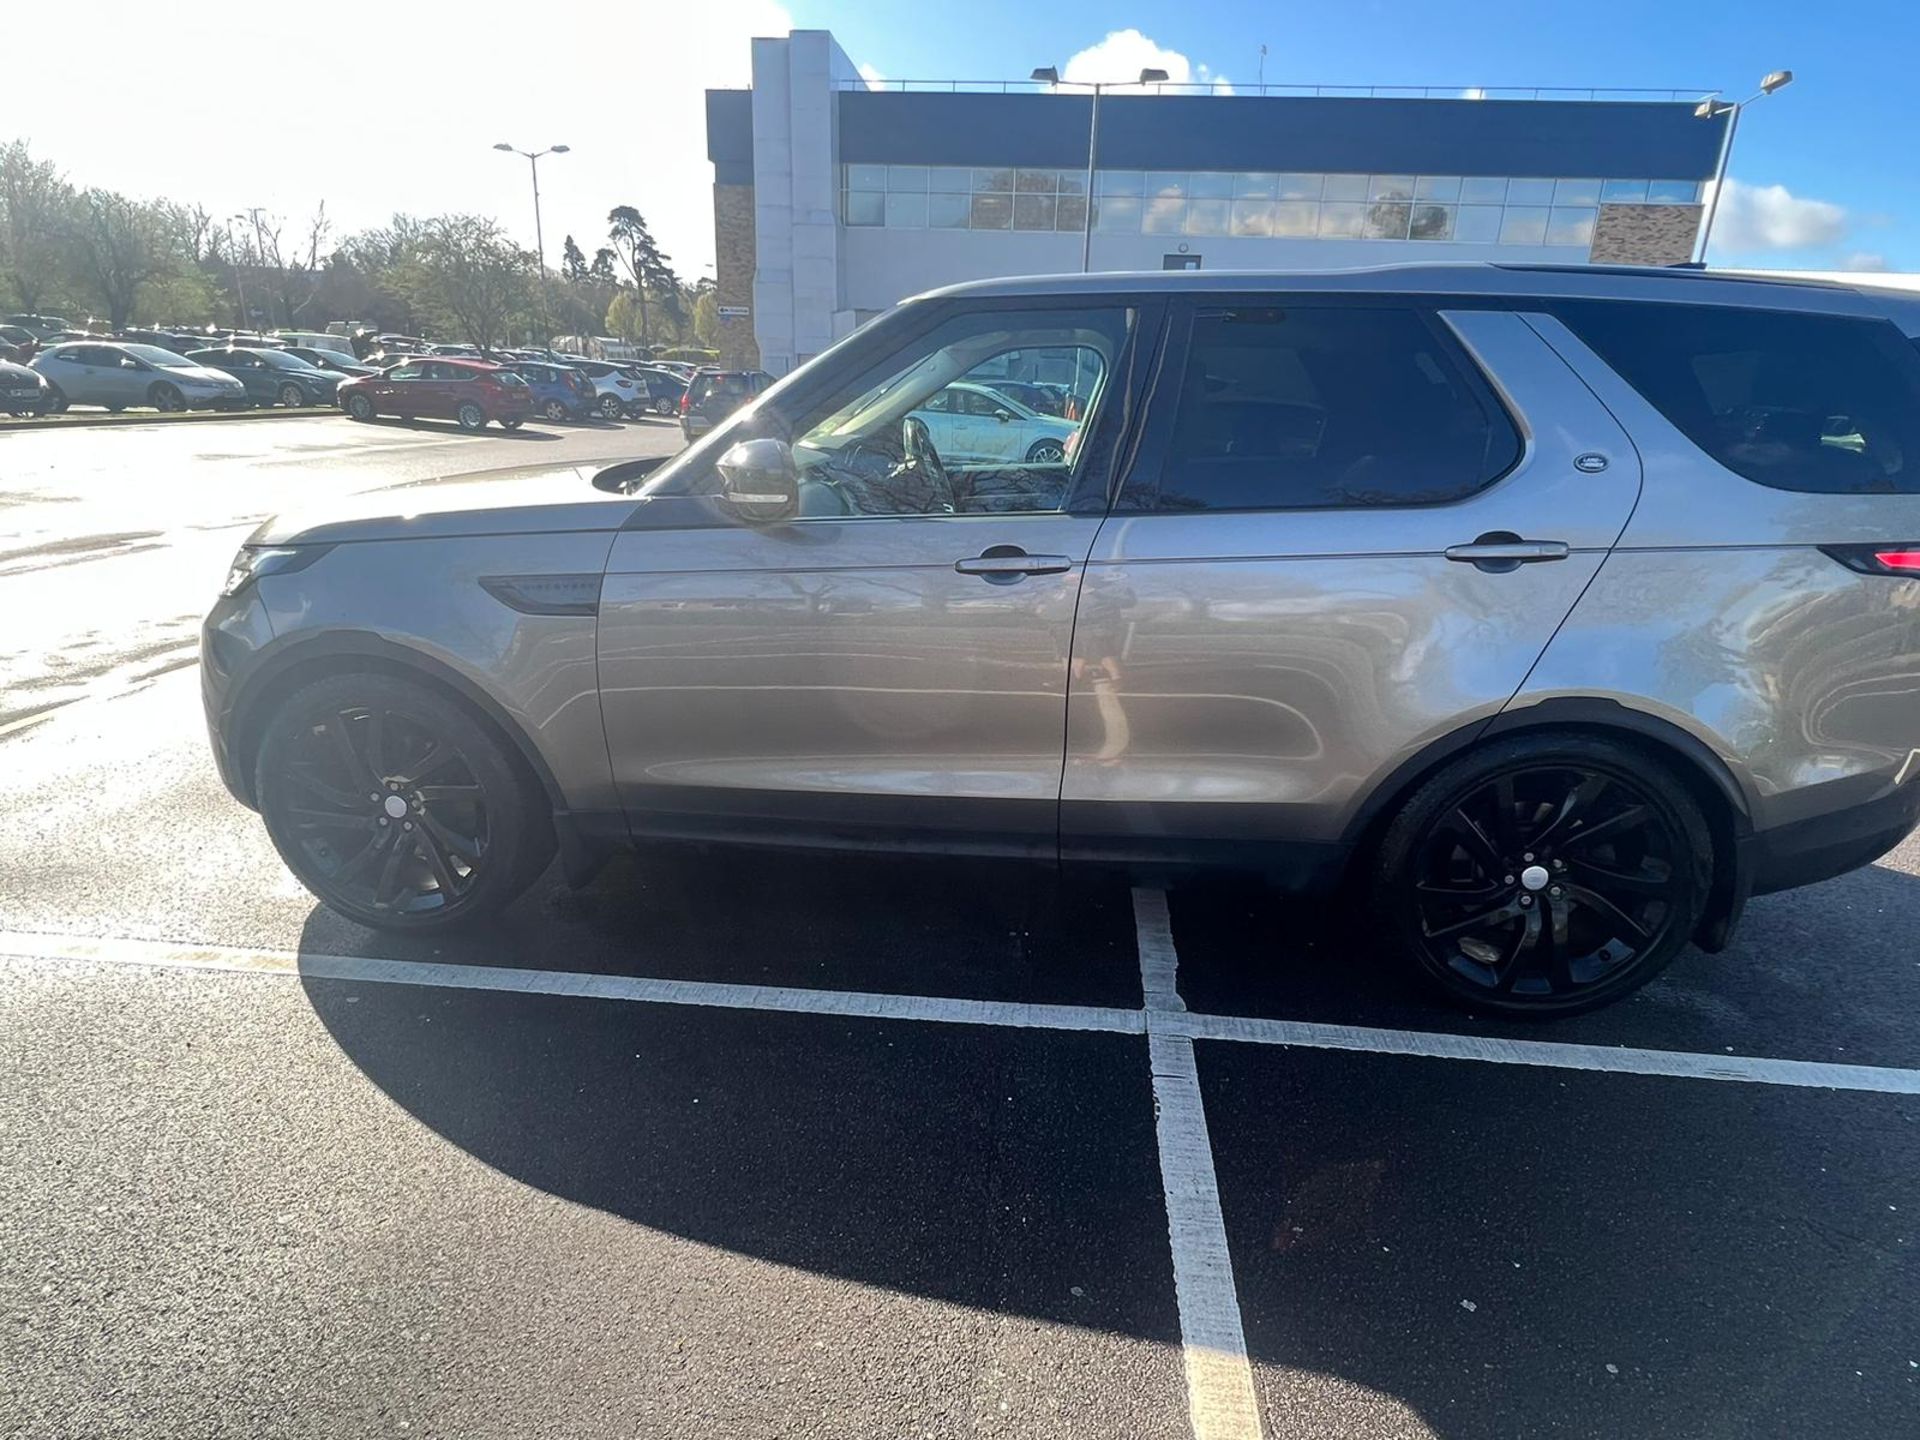 2017 LAND ROVERDISCOVERY FIRST EDITION TD6 AUTO SUV ESTATE, 93K MILES - Image 8 of 9